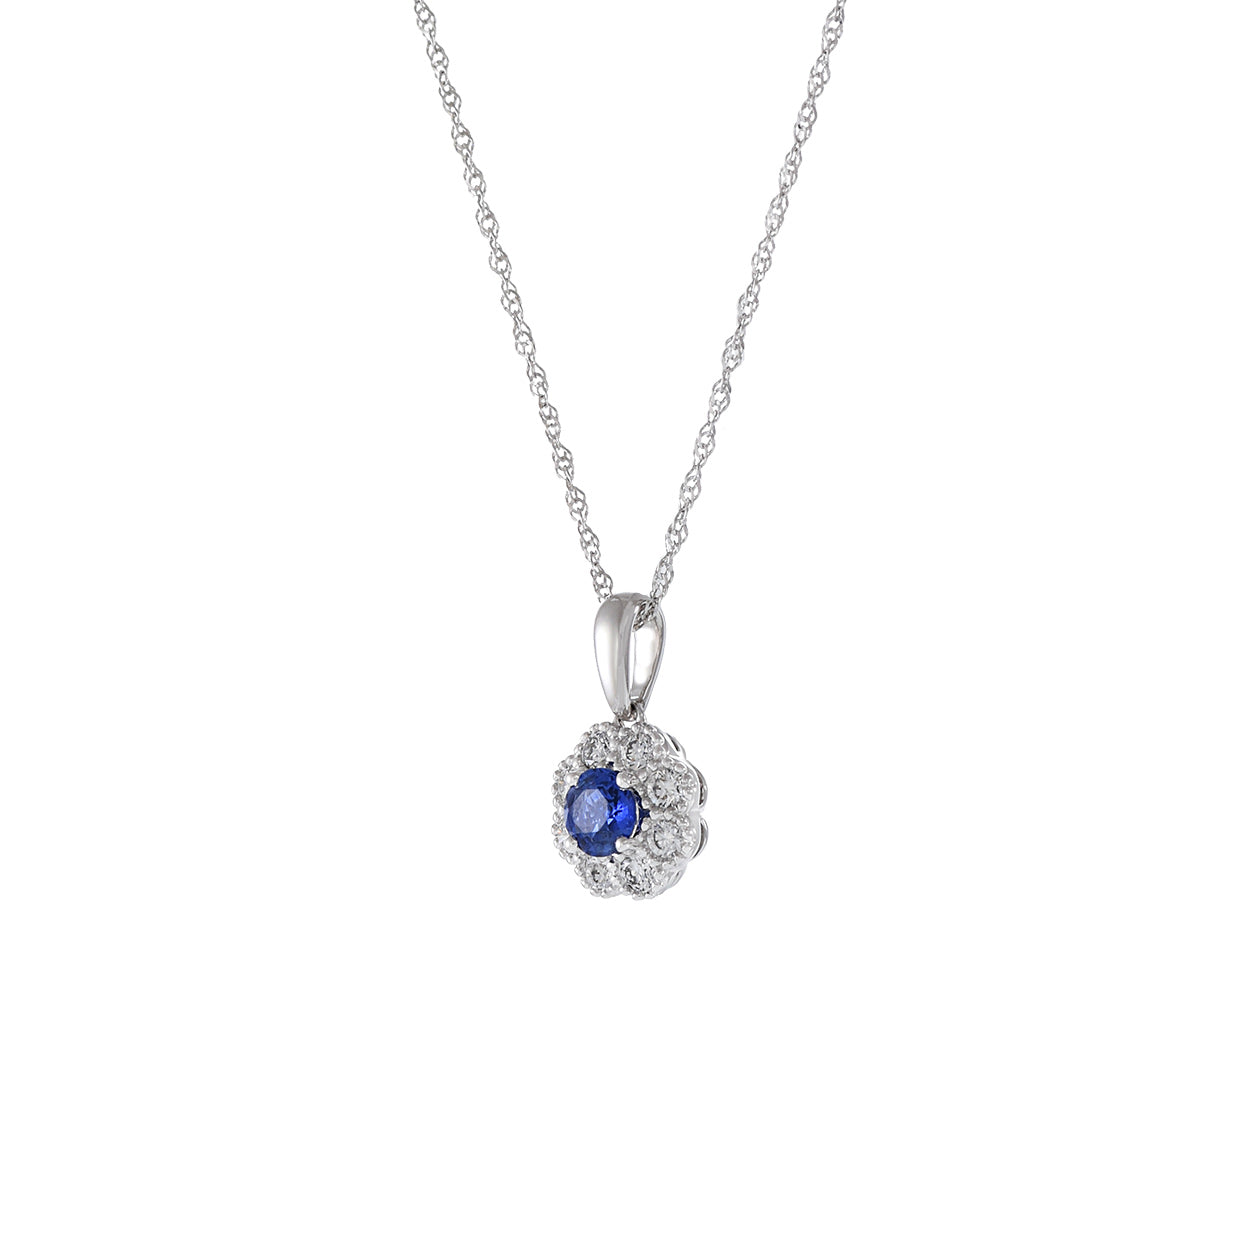 14KT White Gold Blue Sapphire And Diamond Flower Pendant Necklace